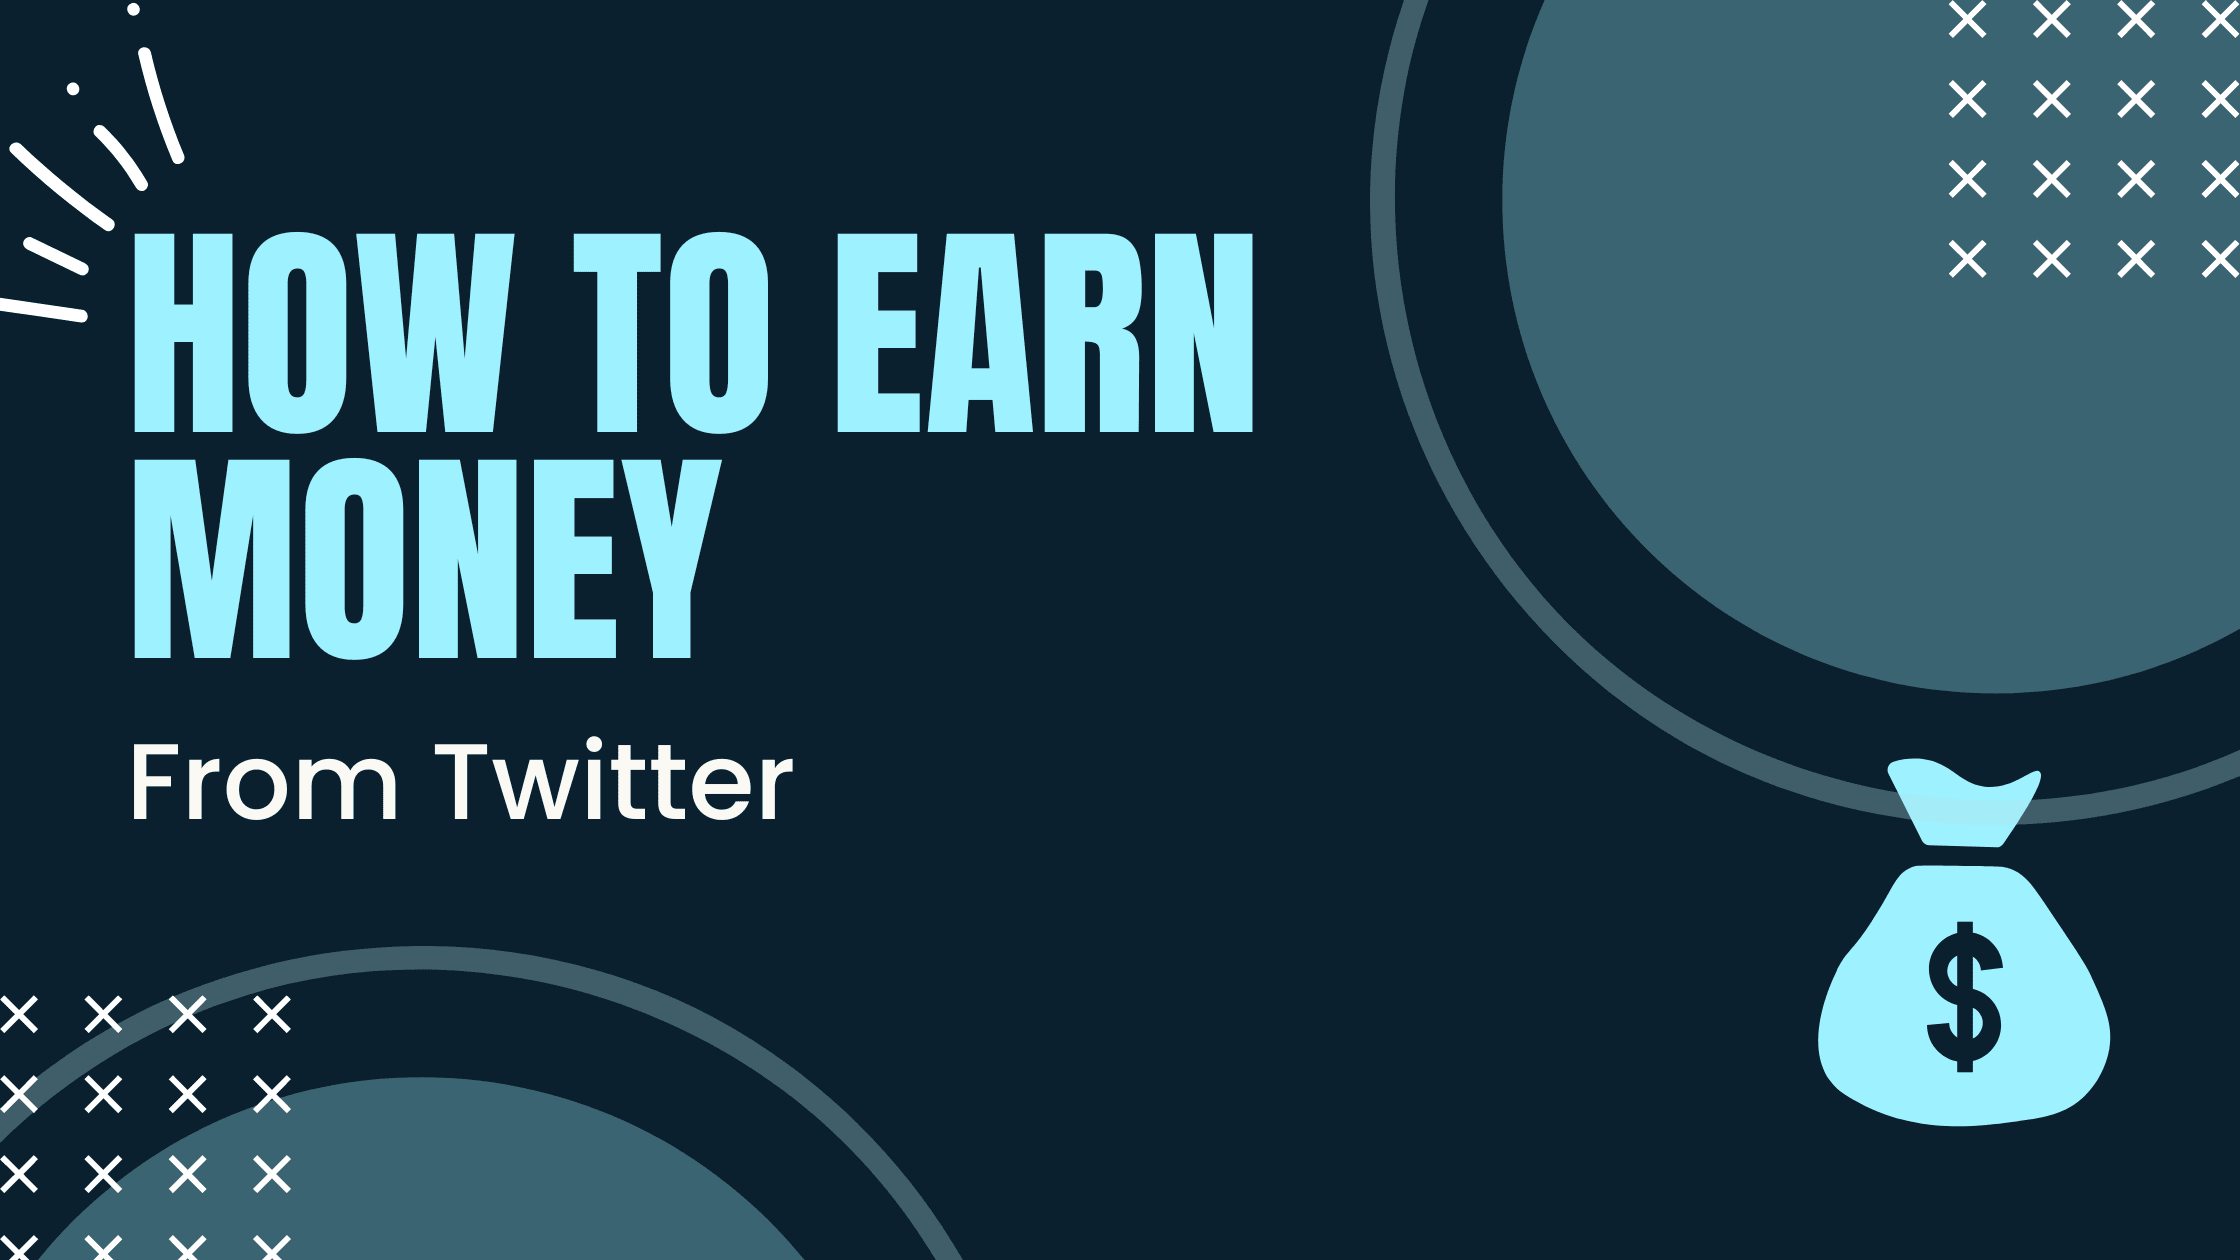 An image of how to earn money from Twitter